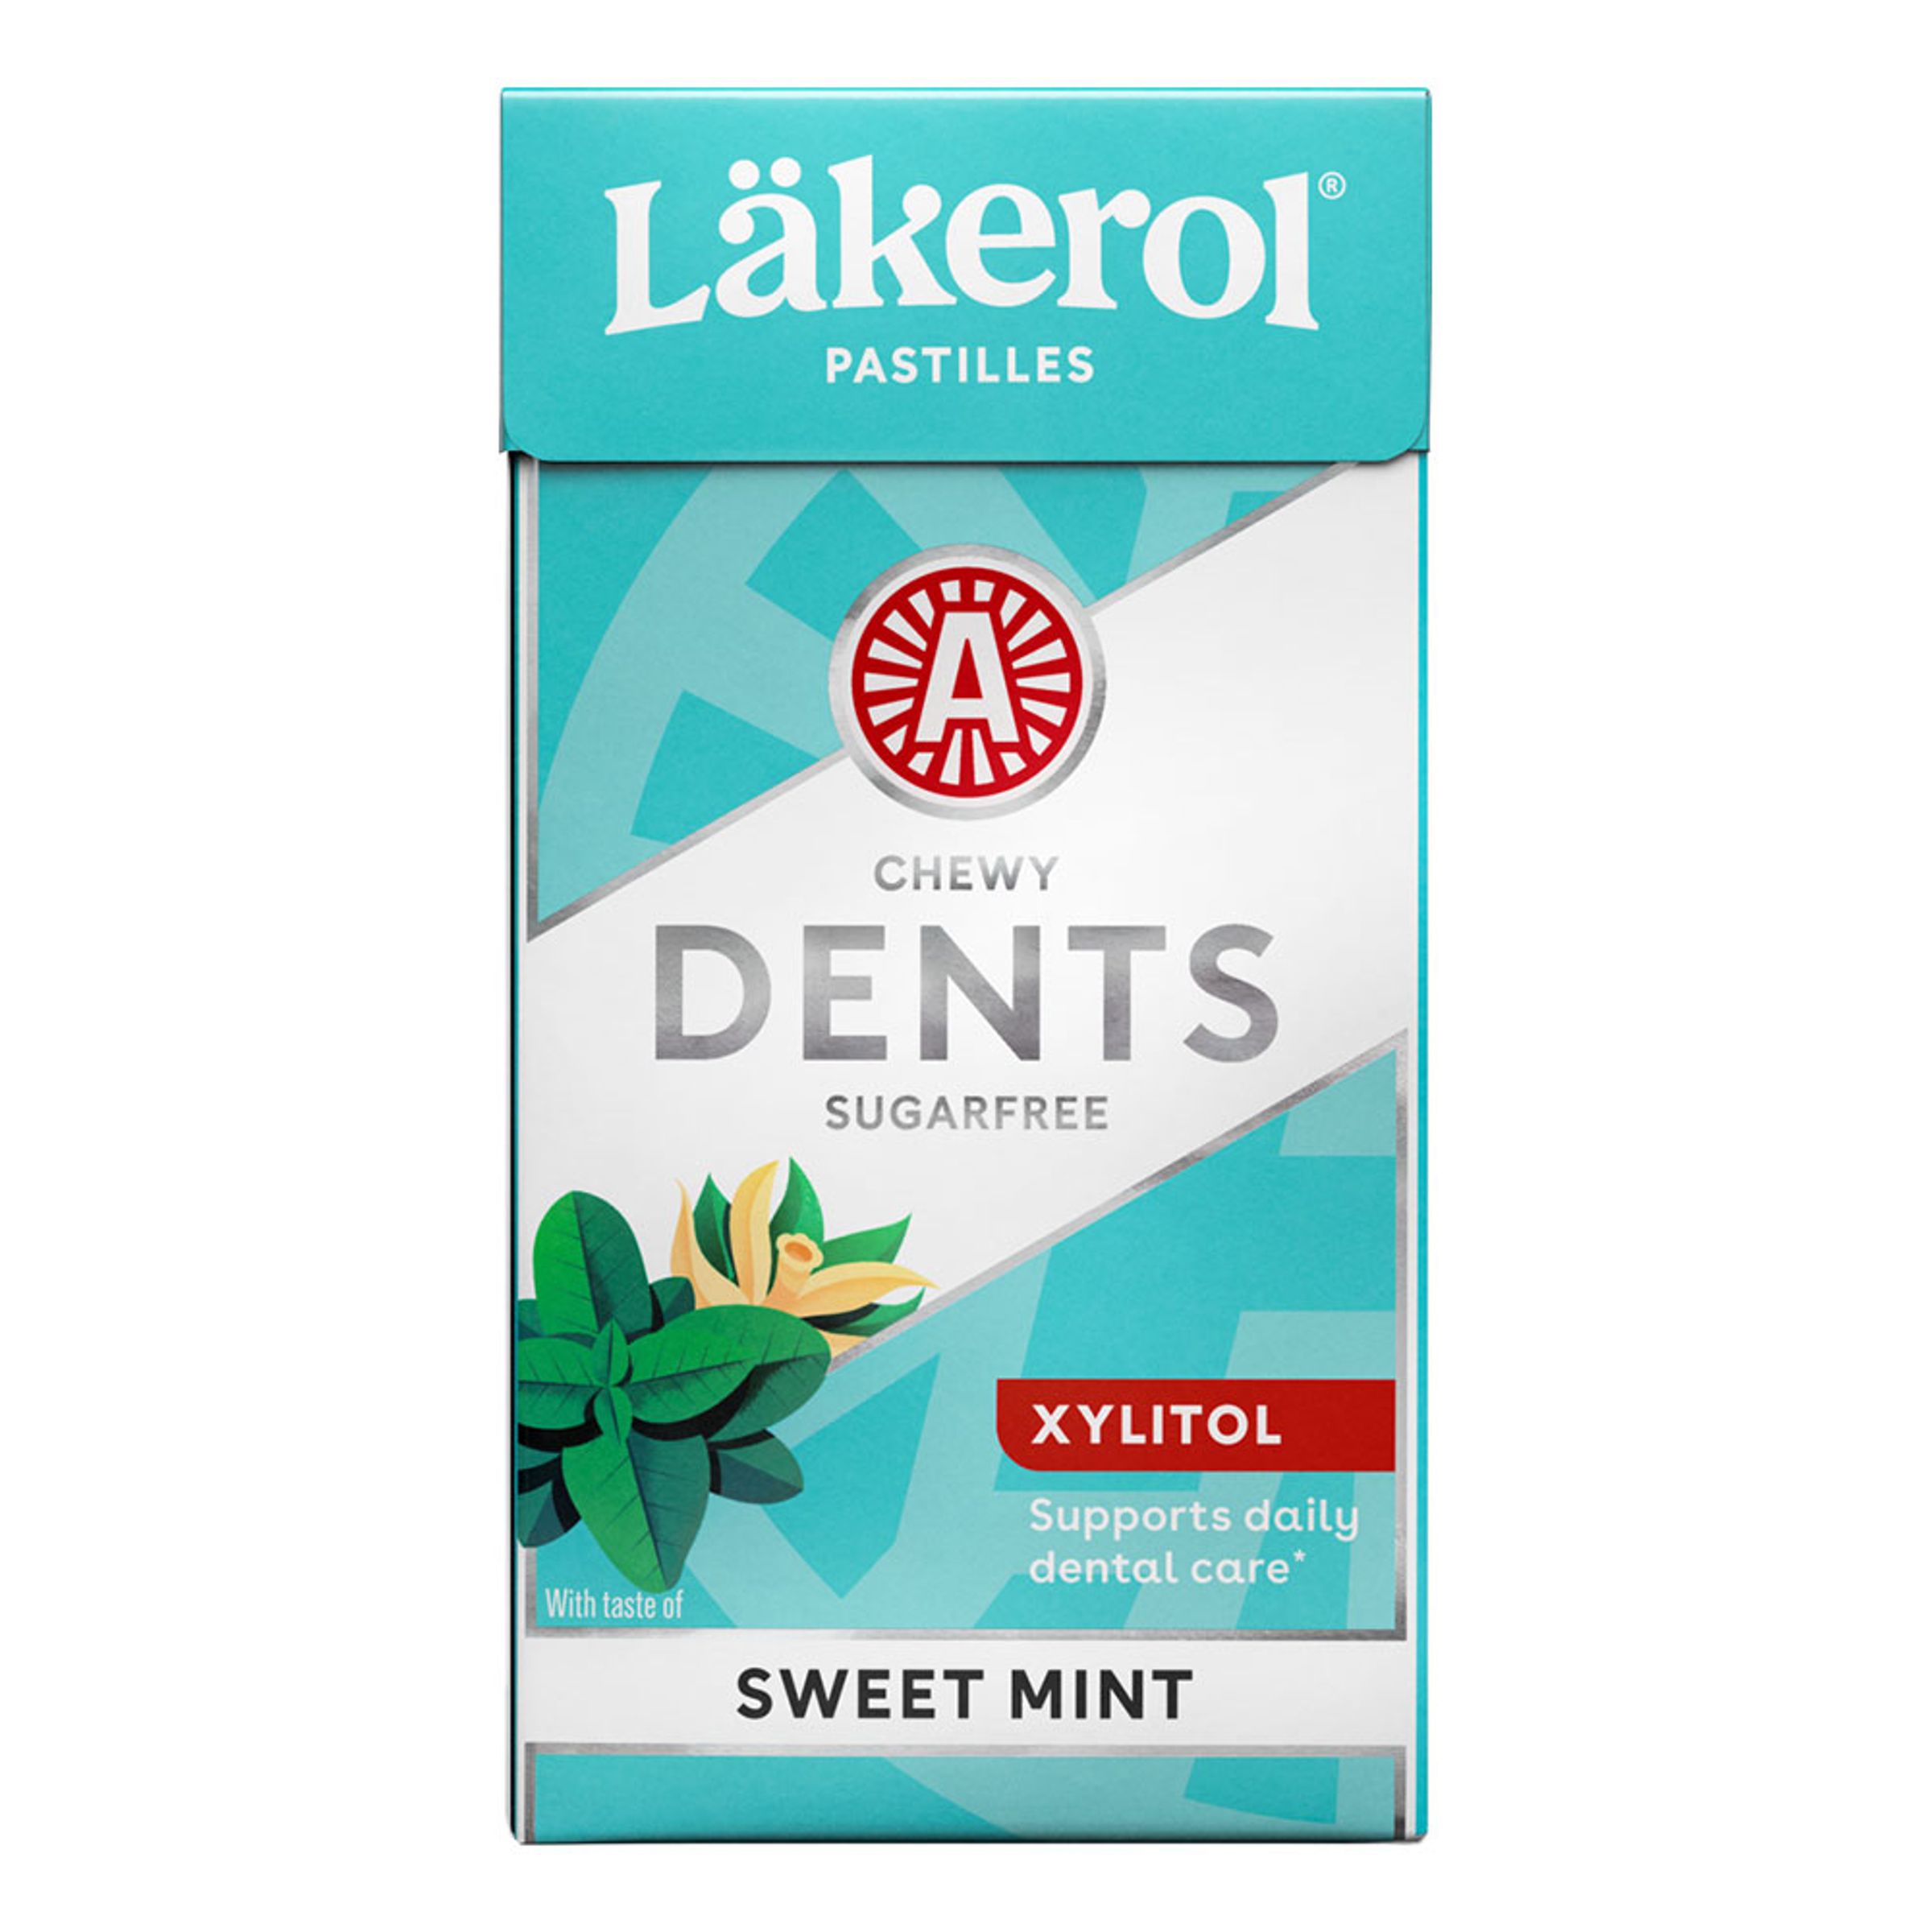 Läkerol Chewy Dents Sweetmint Ask - 36 gram